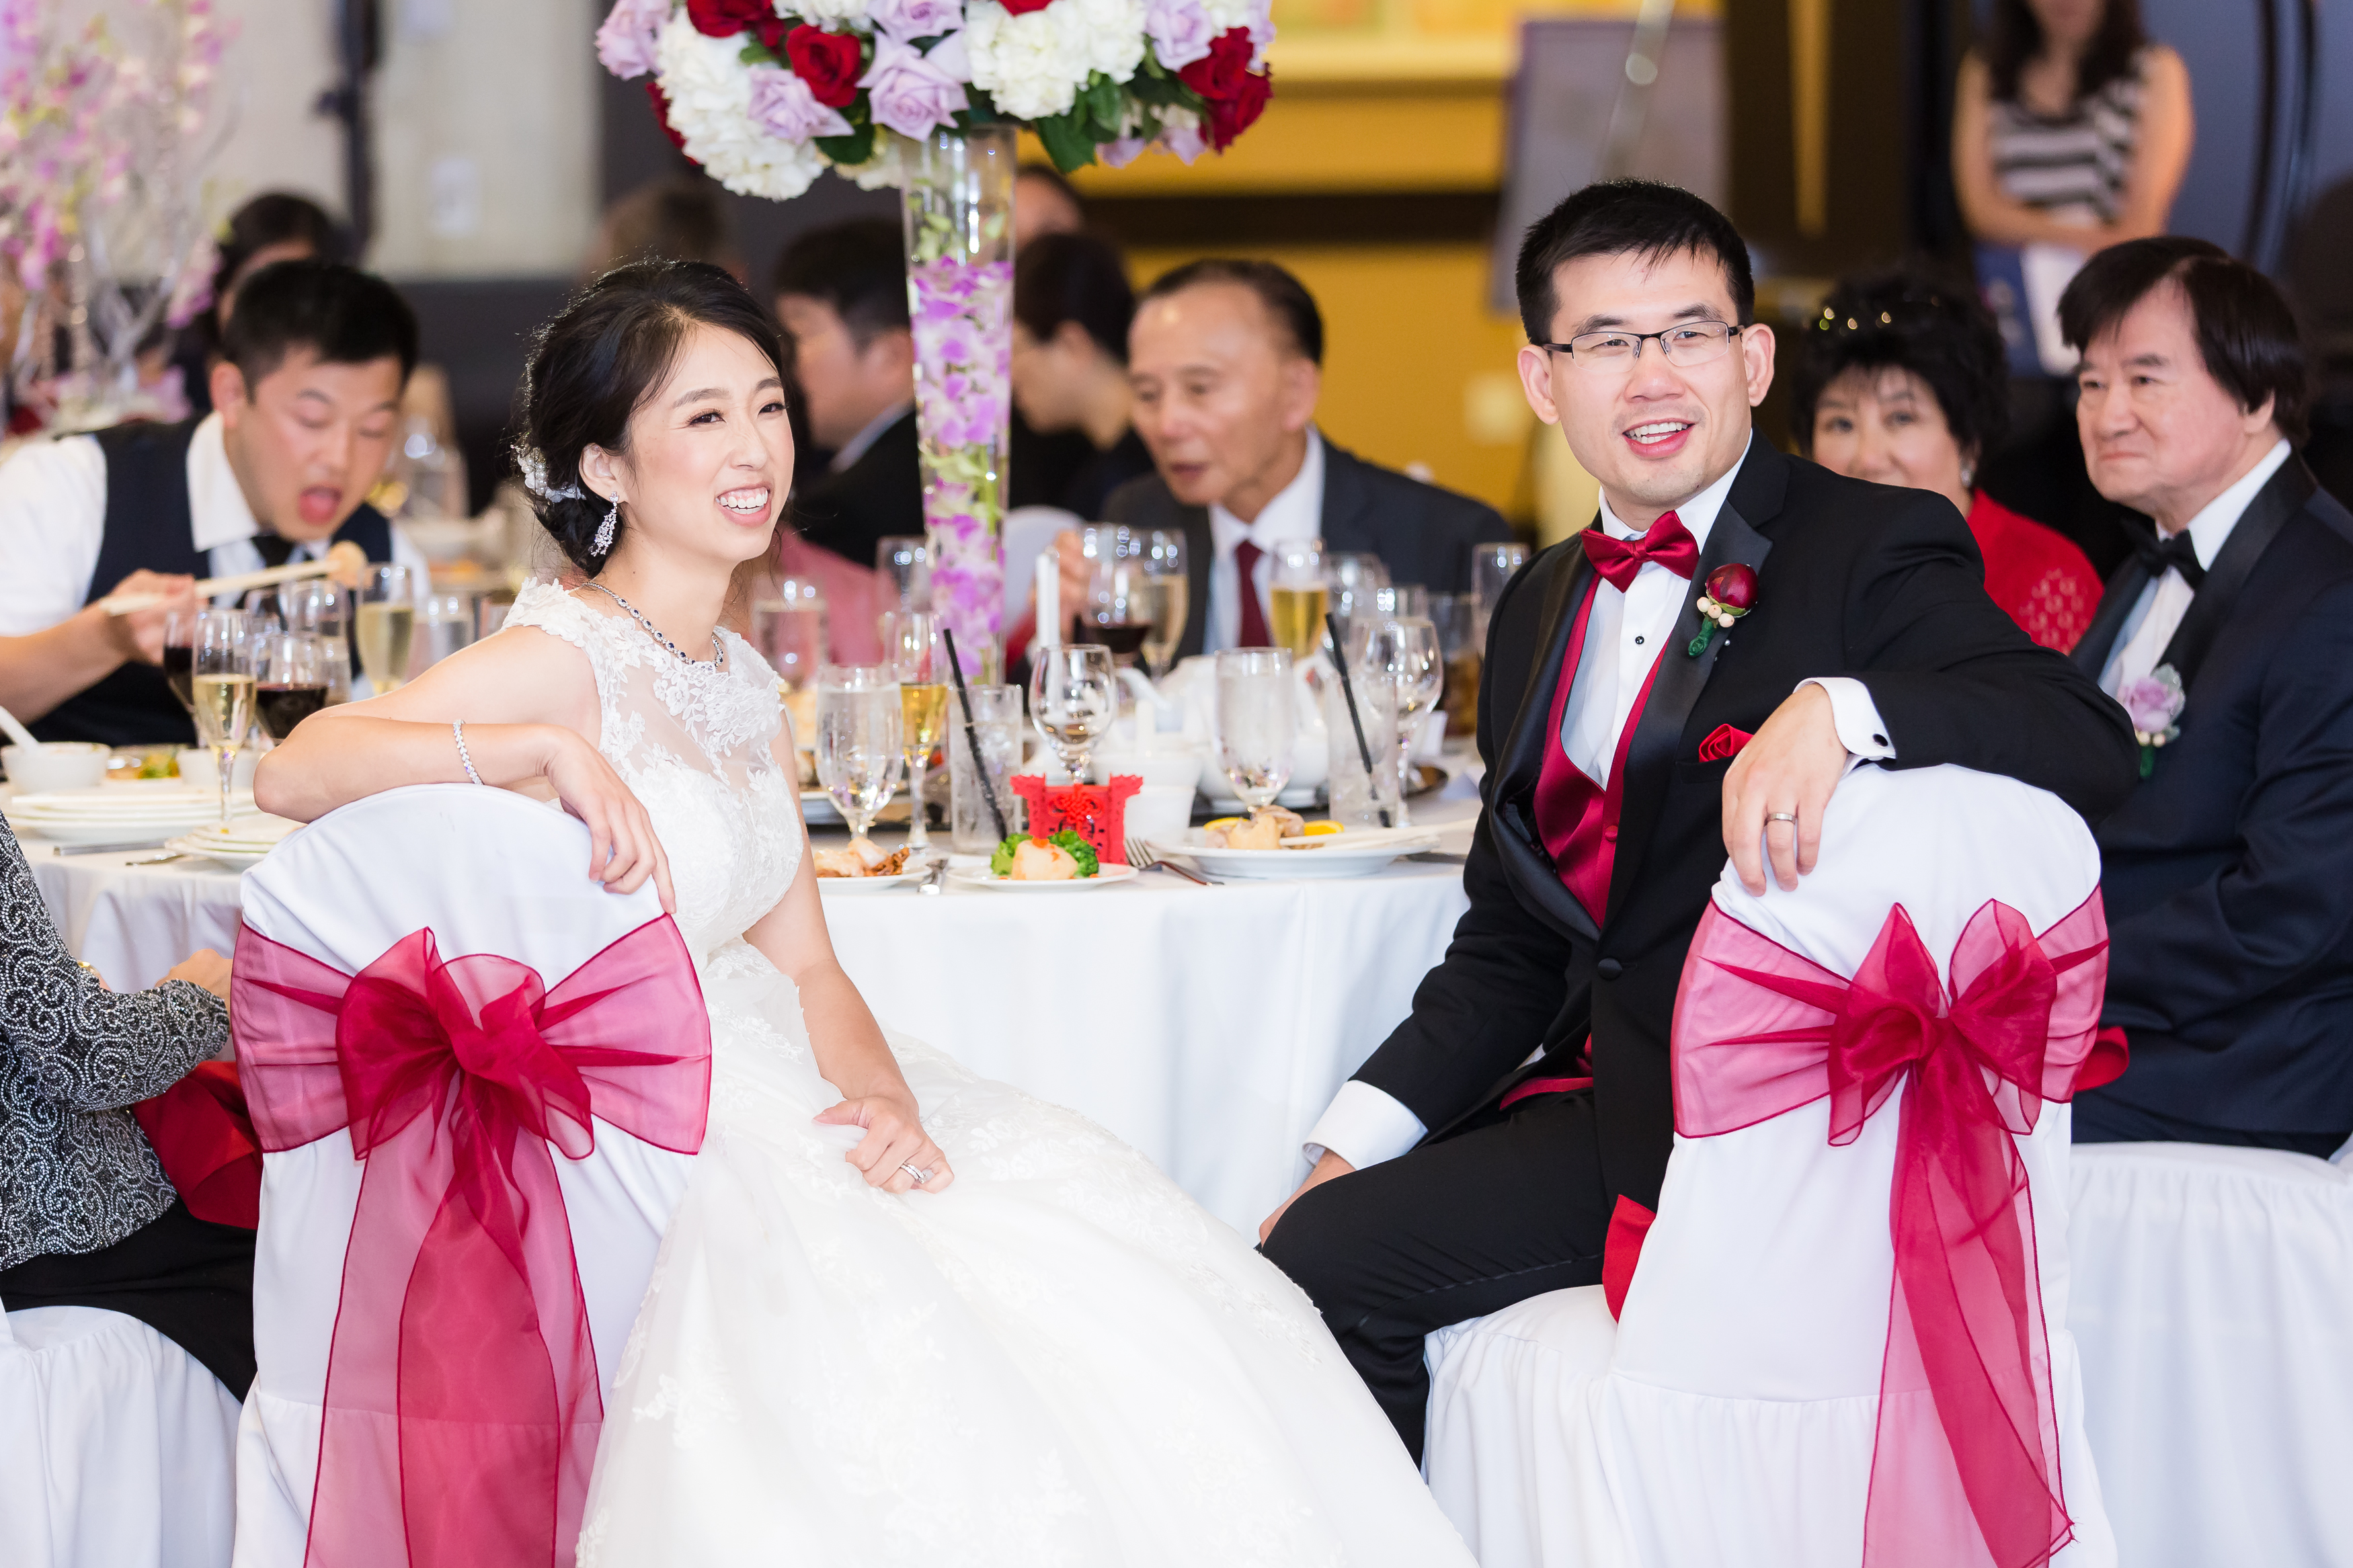 Wedding couple smiling and sitting in white chairs with red ribbons